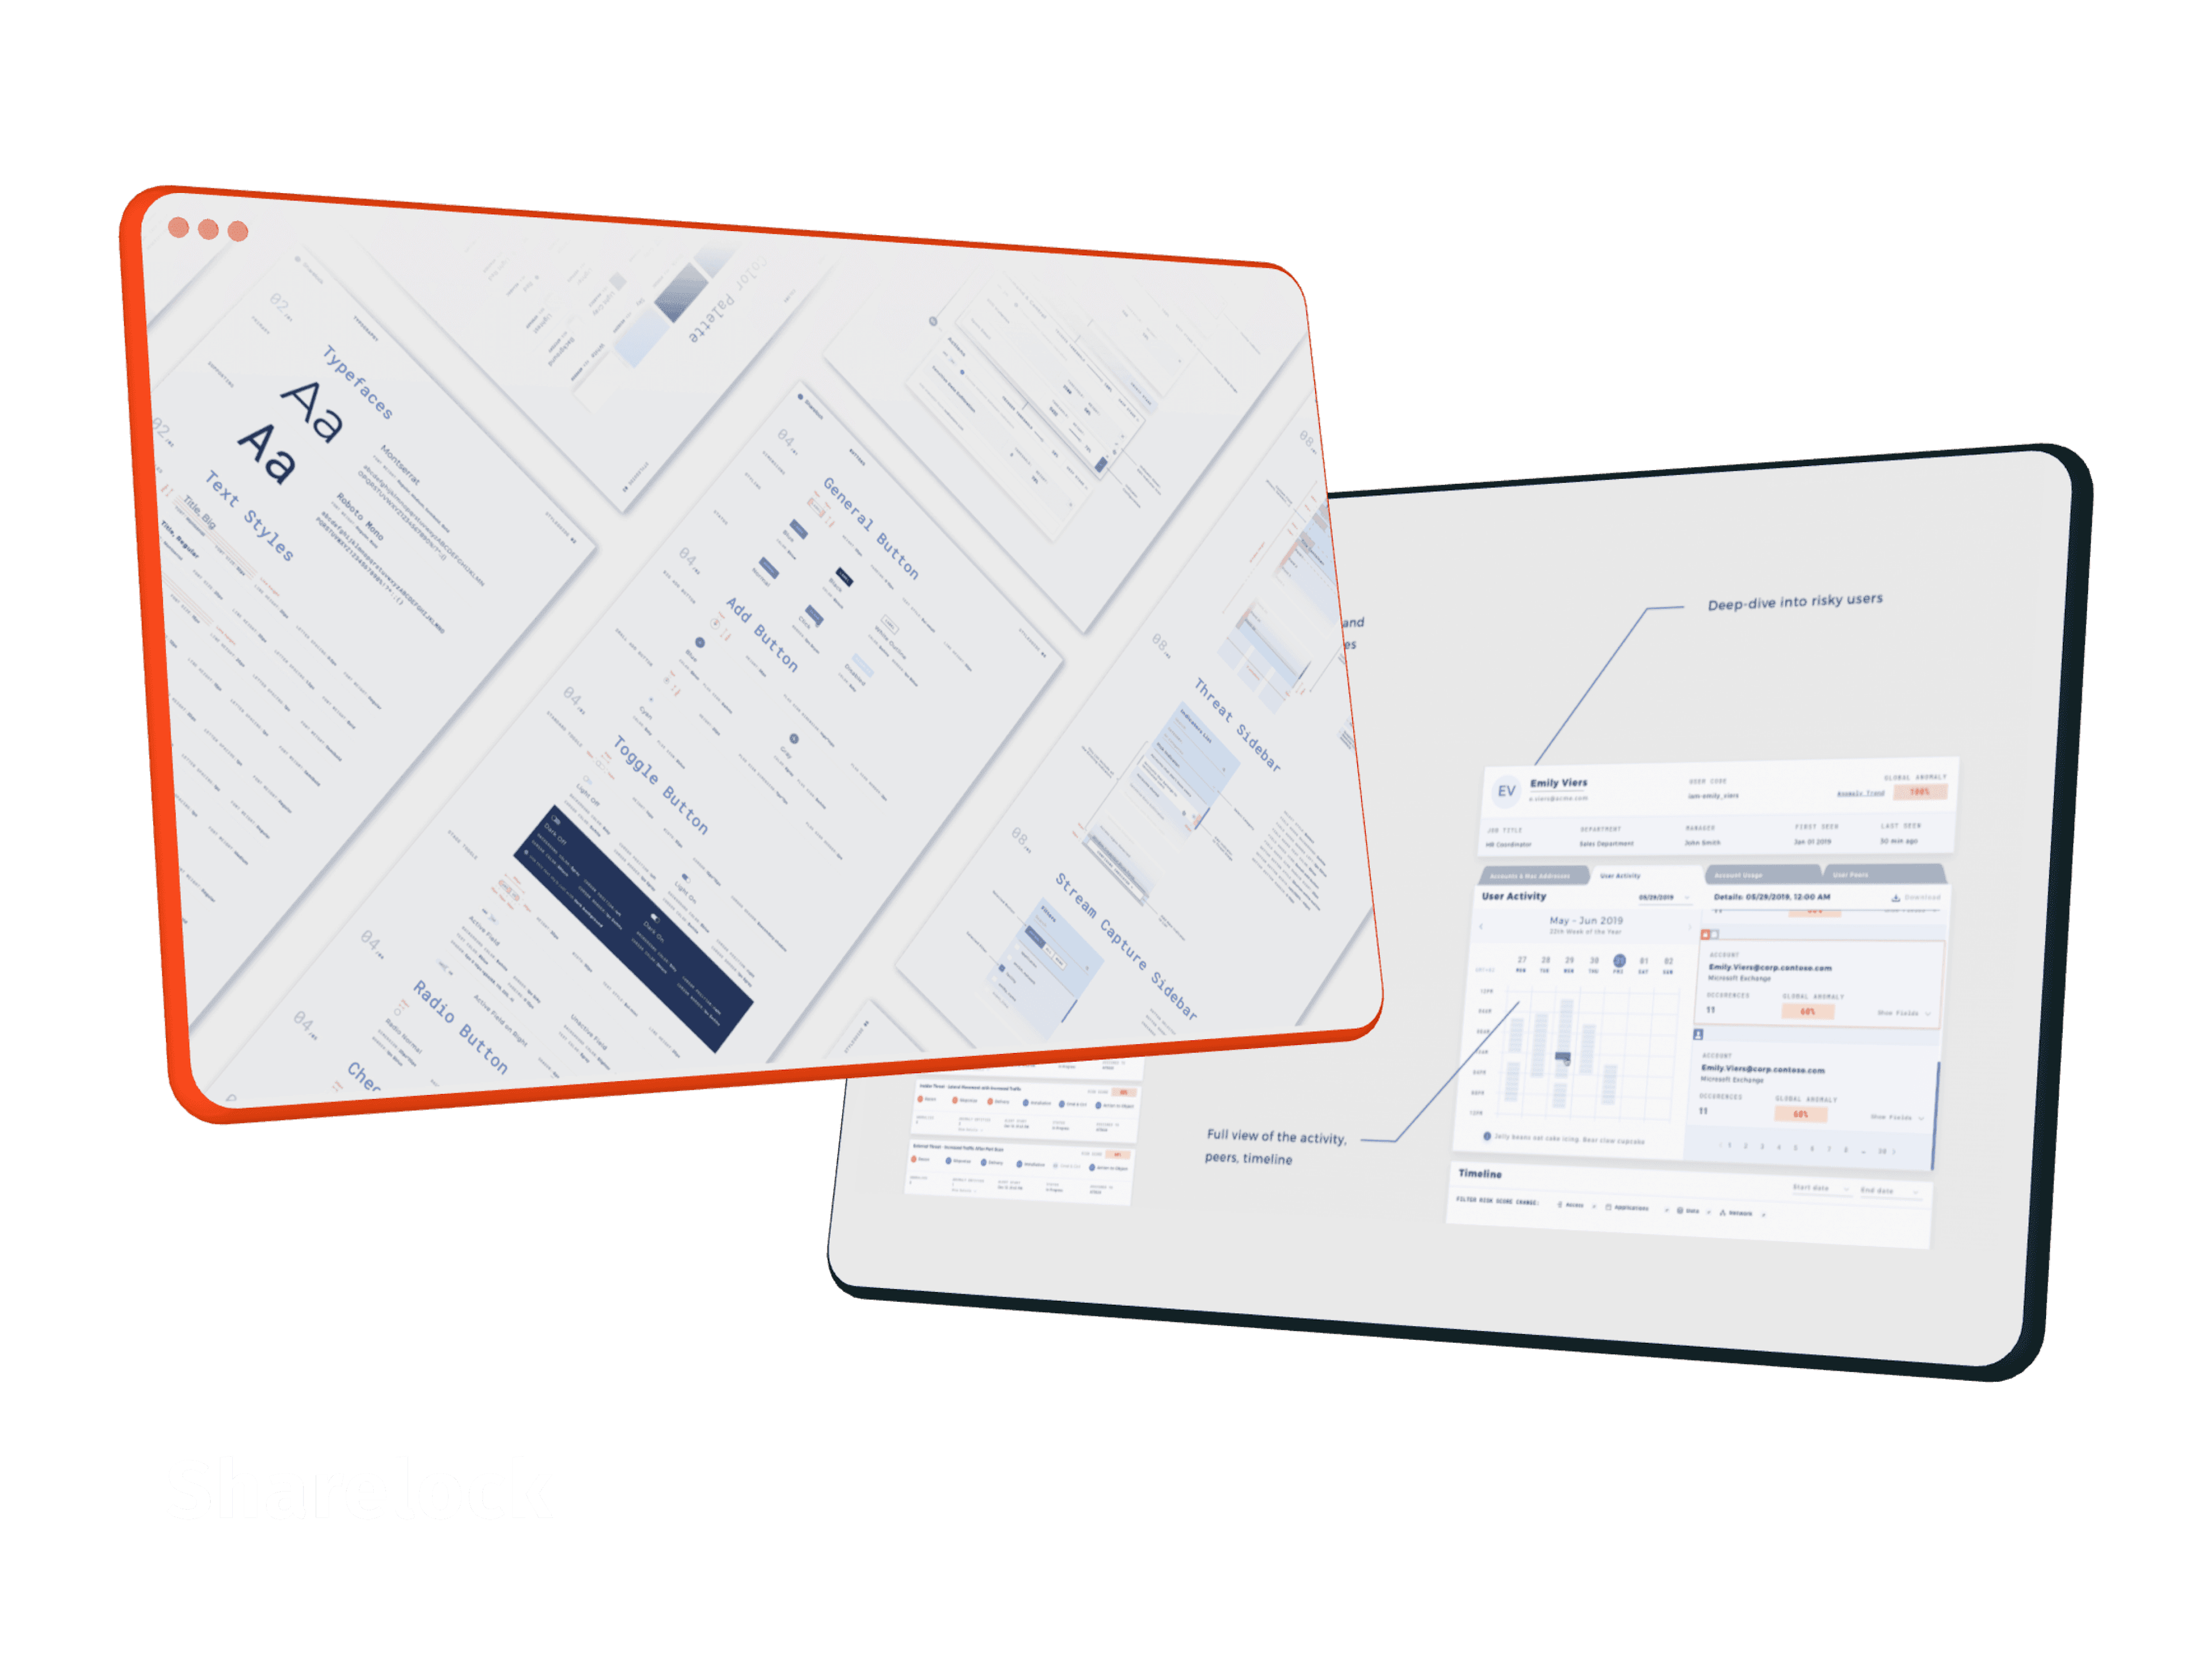 Sharelock: AI powered Cybersecurity, before it was cool